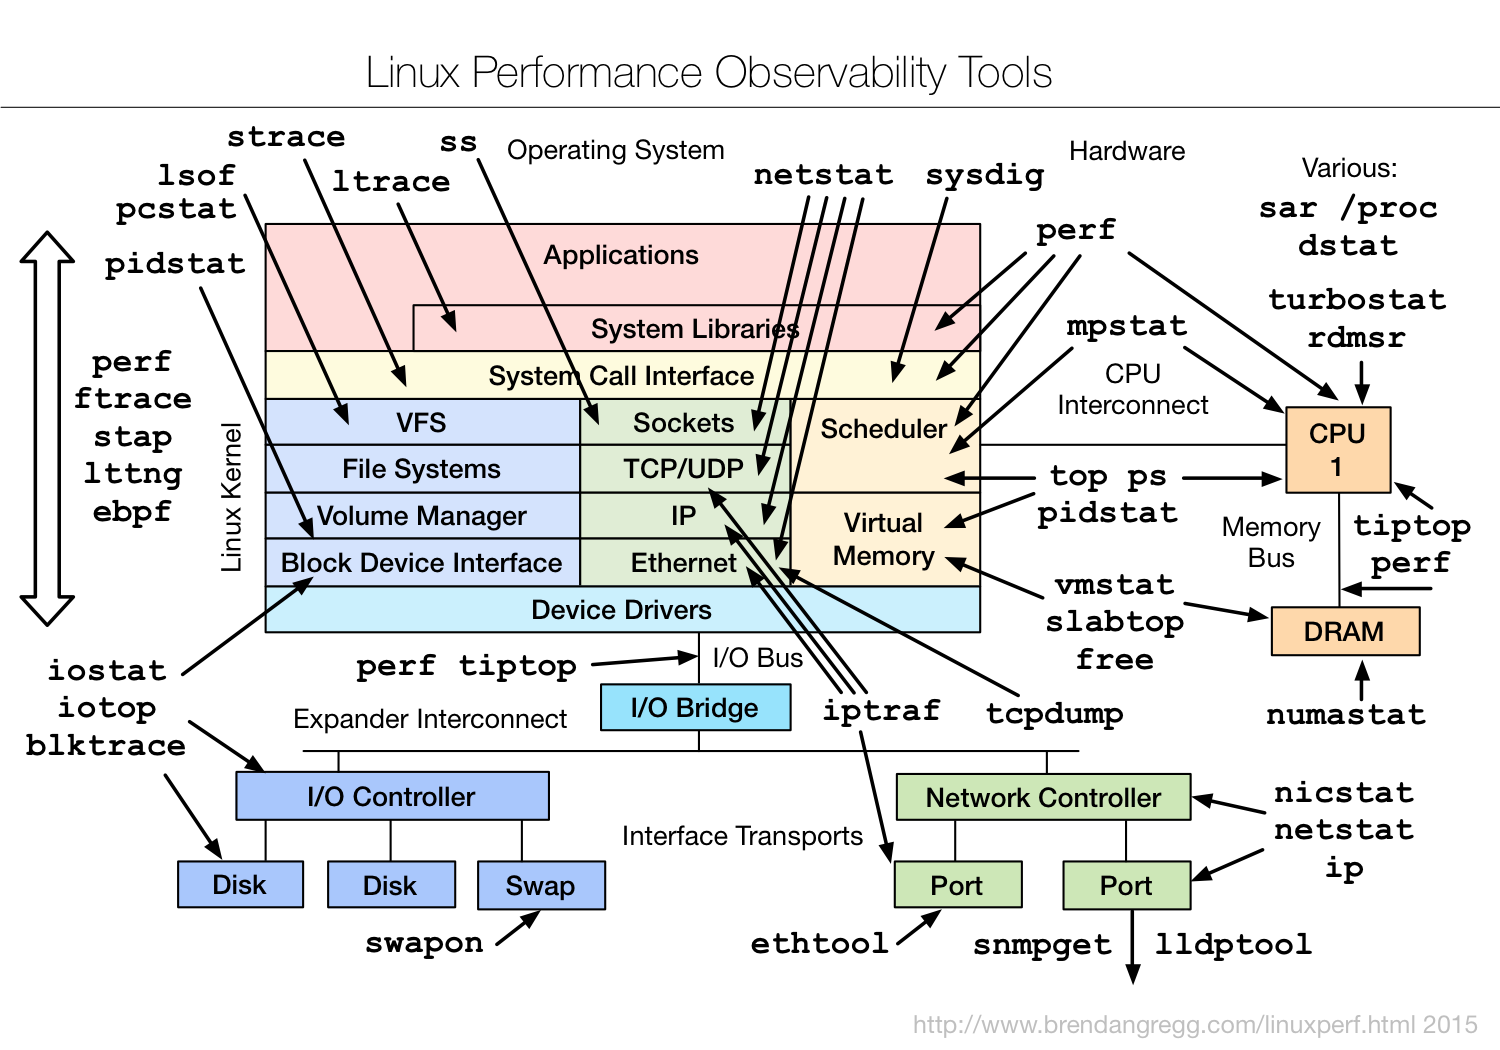 Linux observability tools